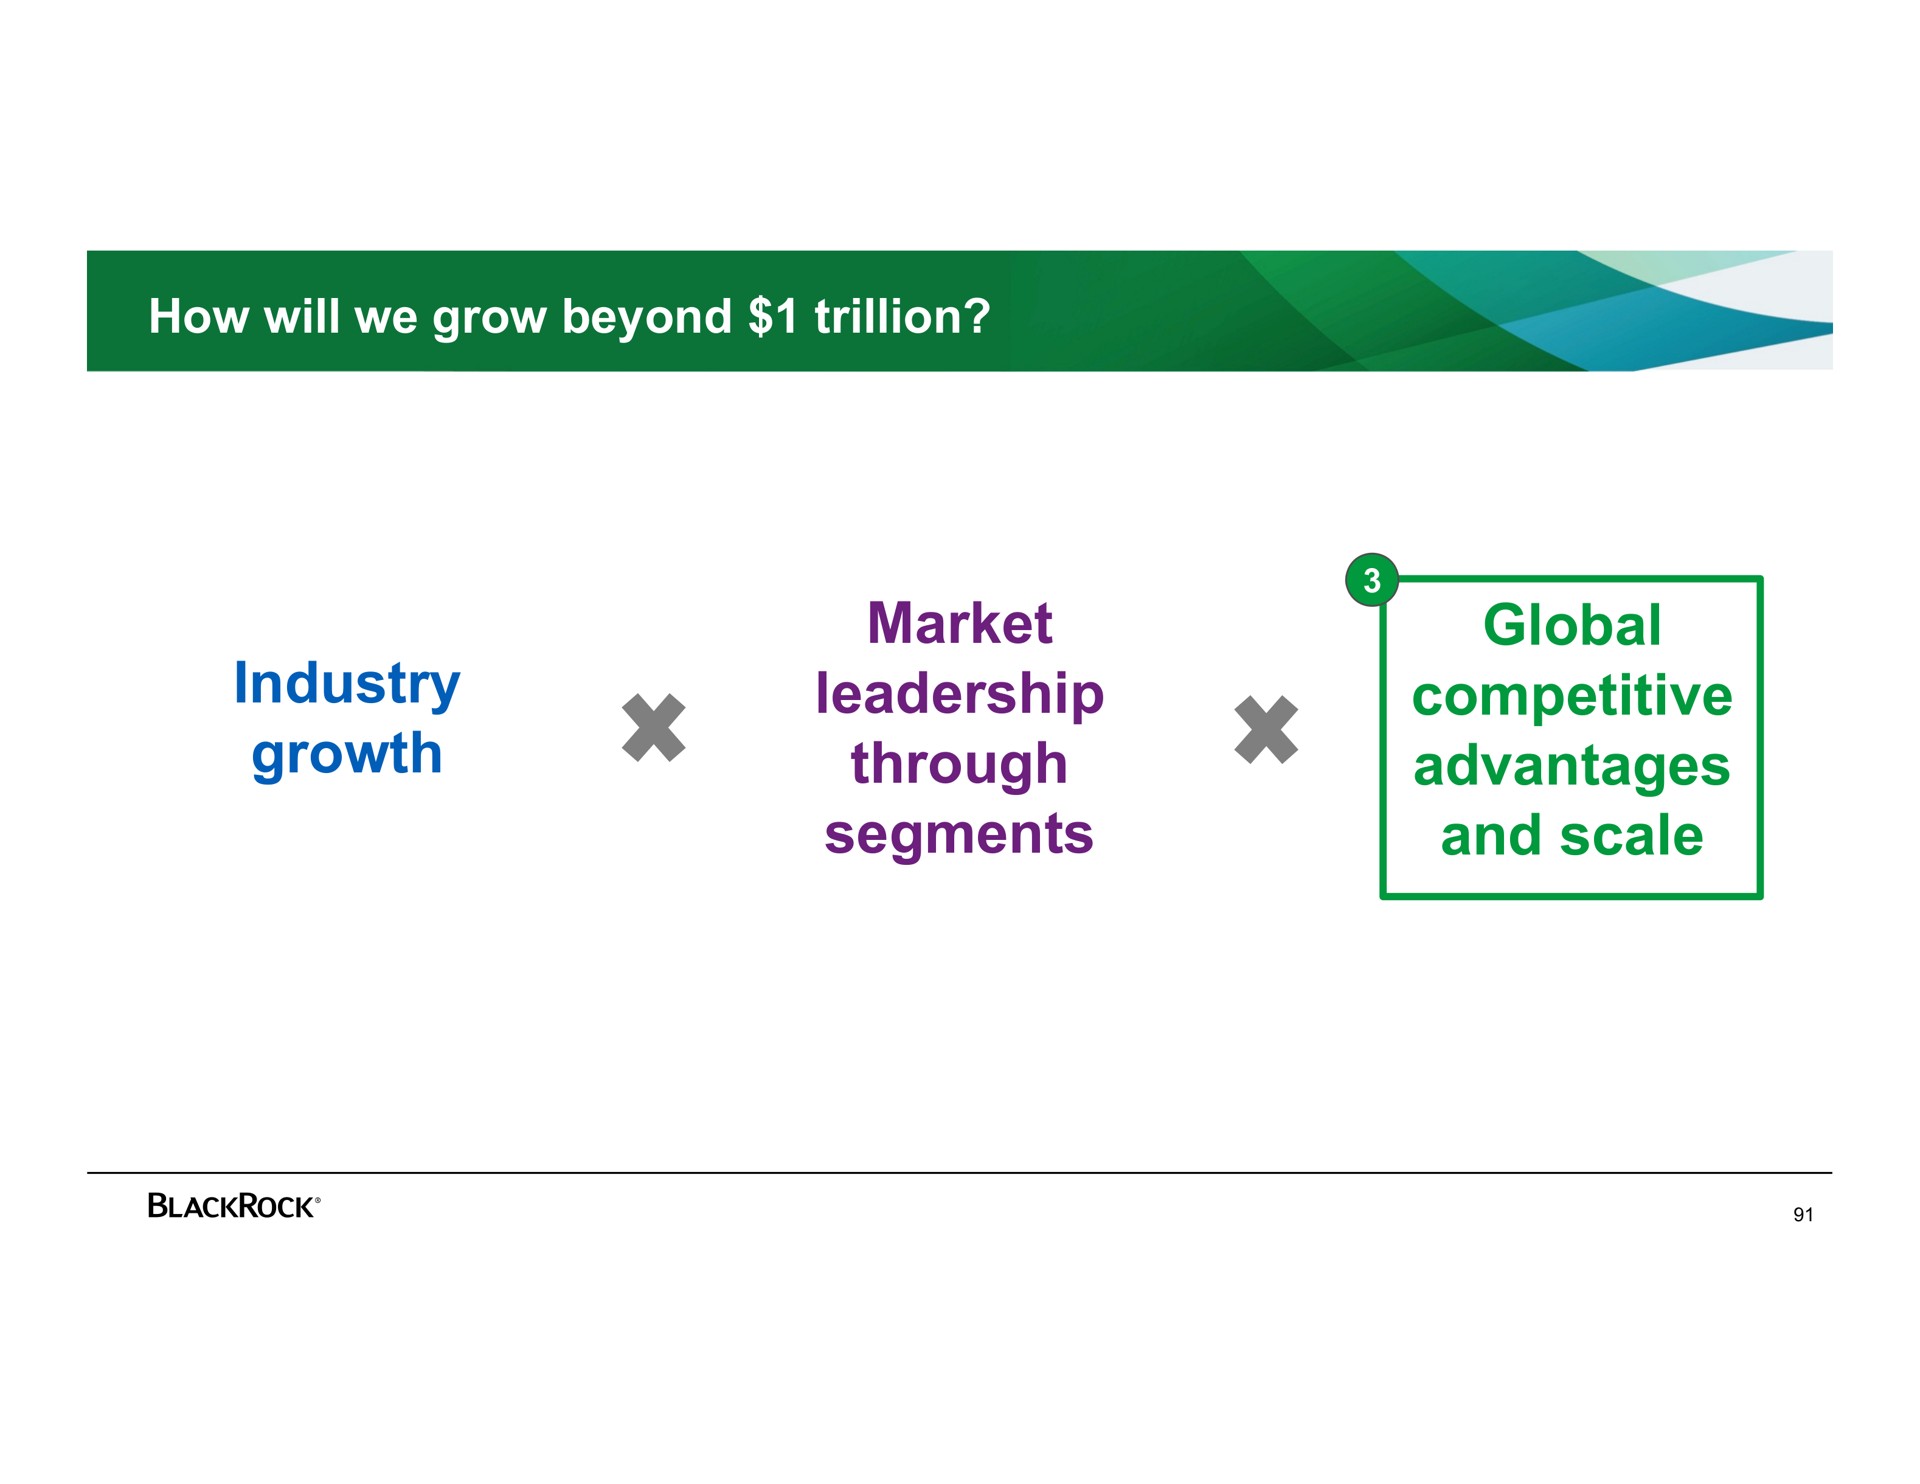 how will we grow beyond trillion industry growth market leadership through segments global competitive advantages and scale | BlackRock